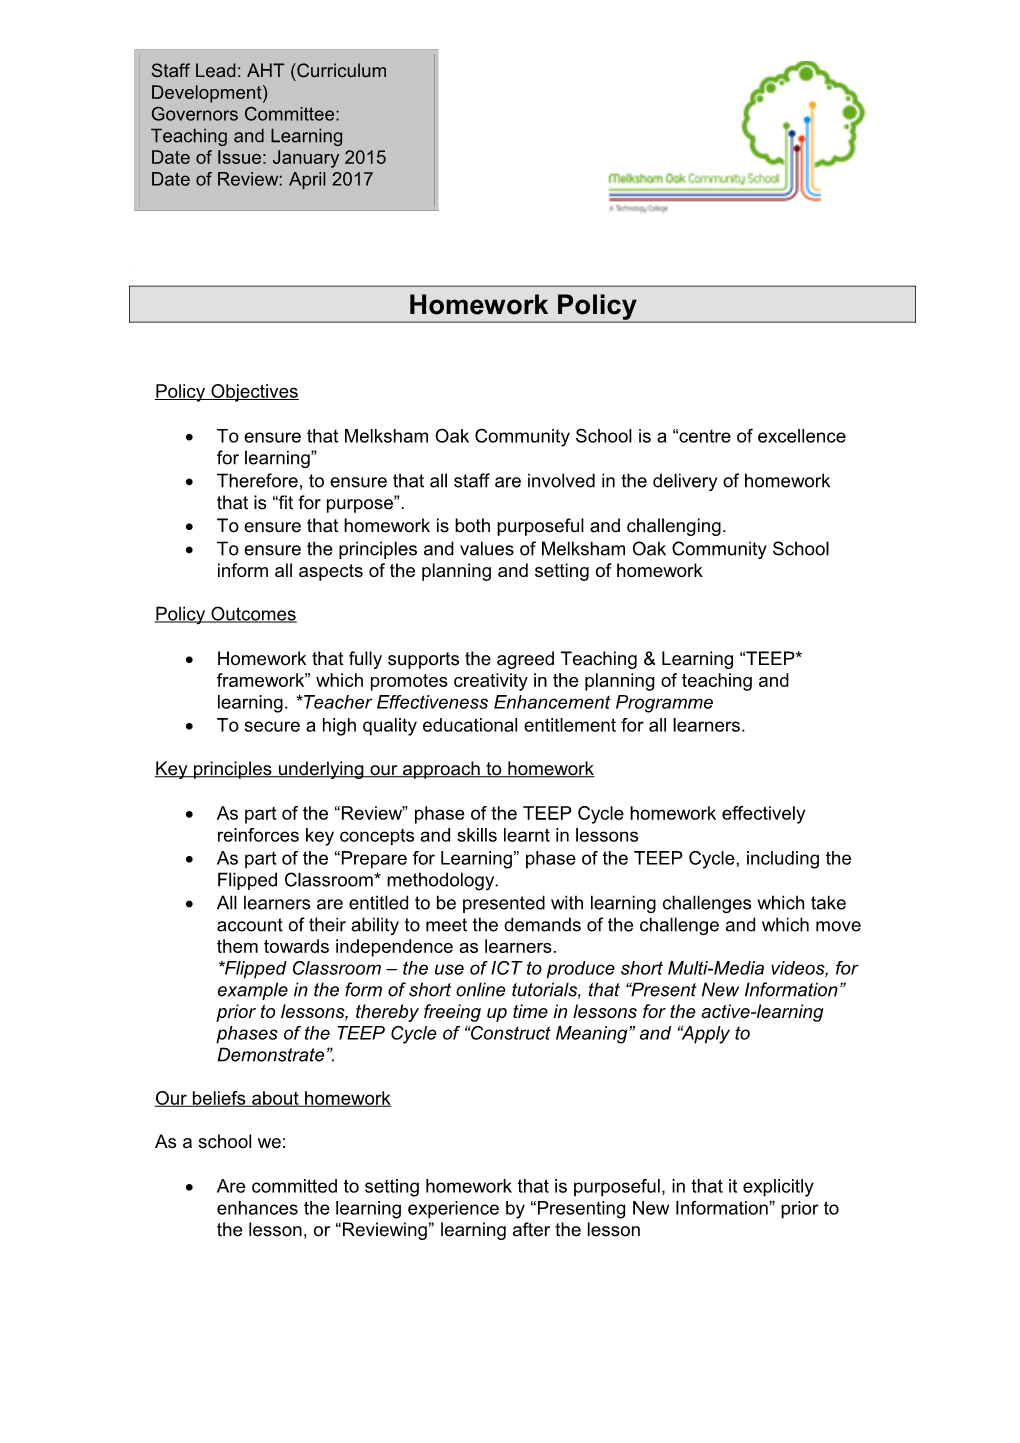 Policy Objectives